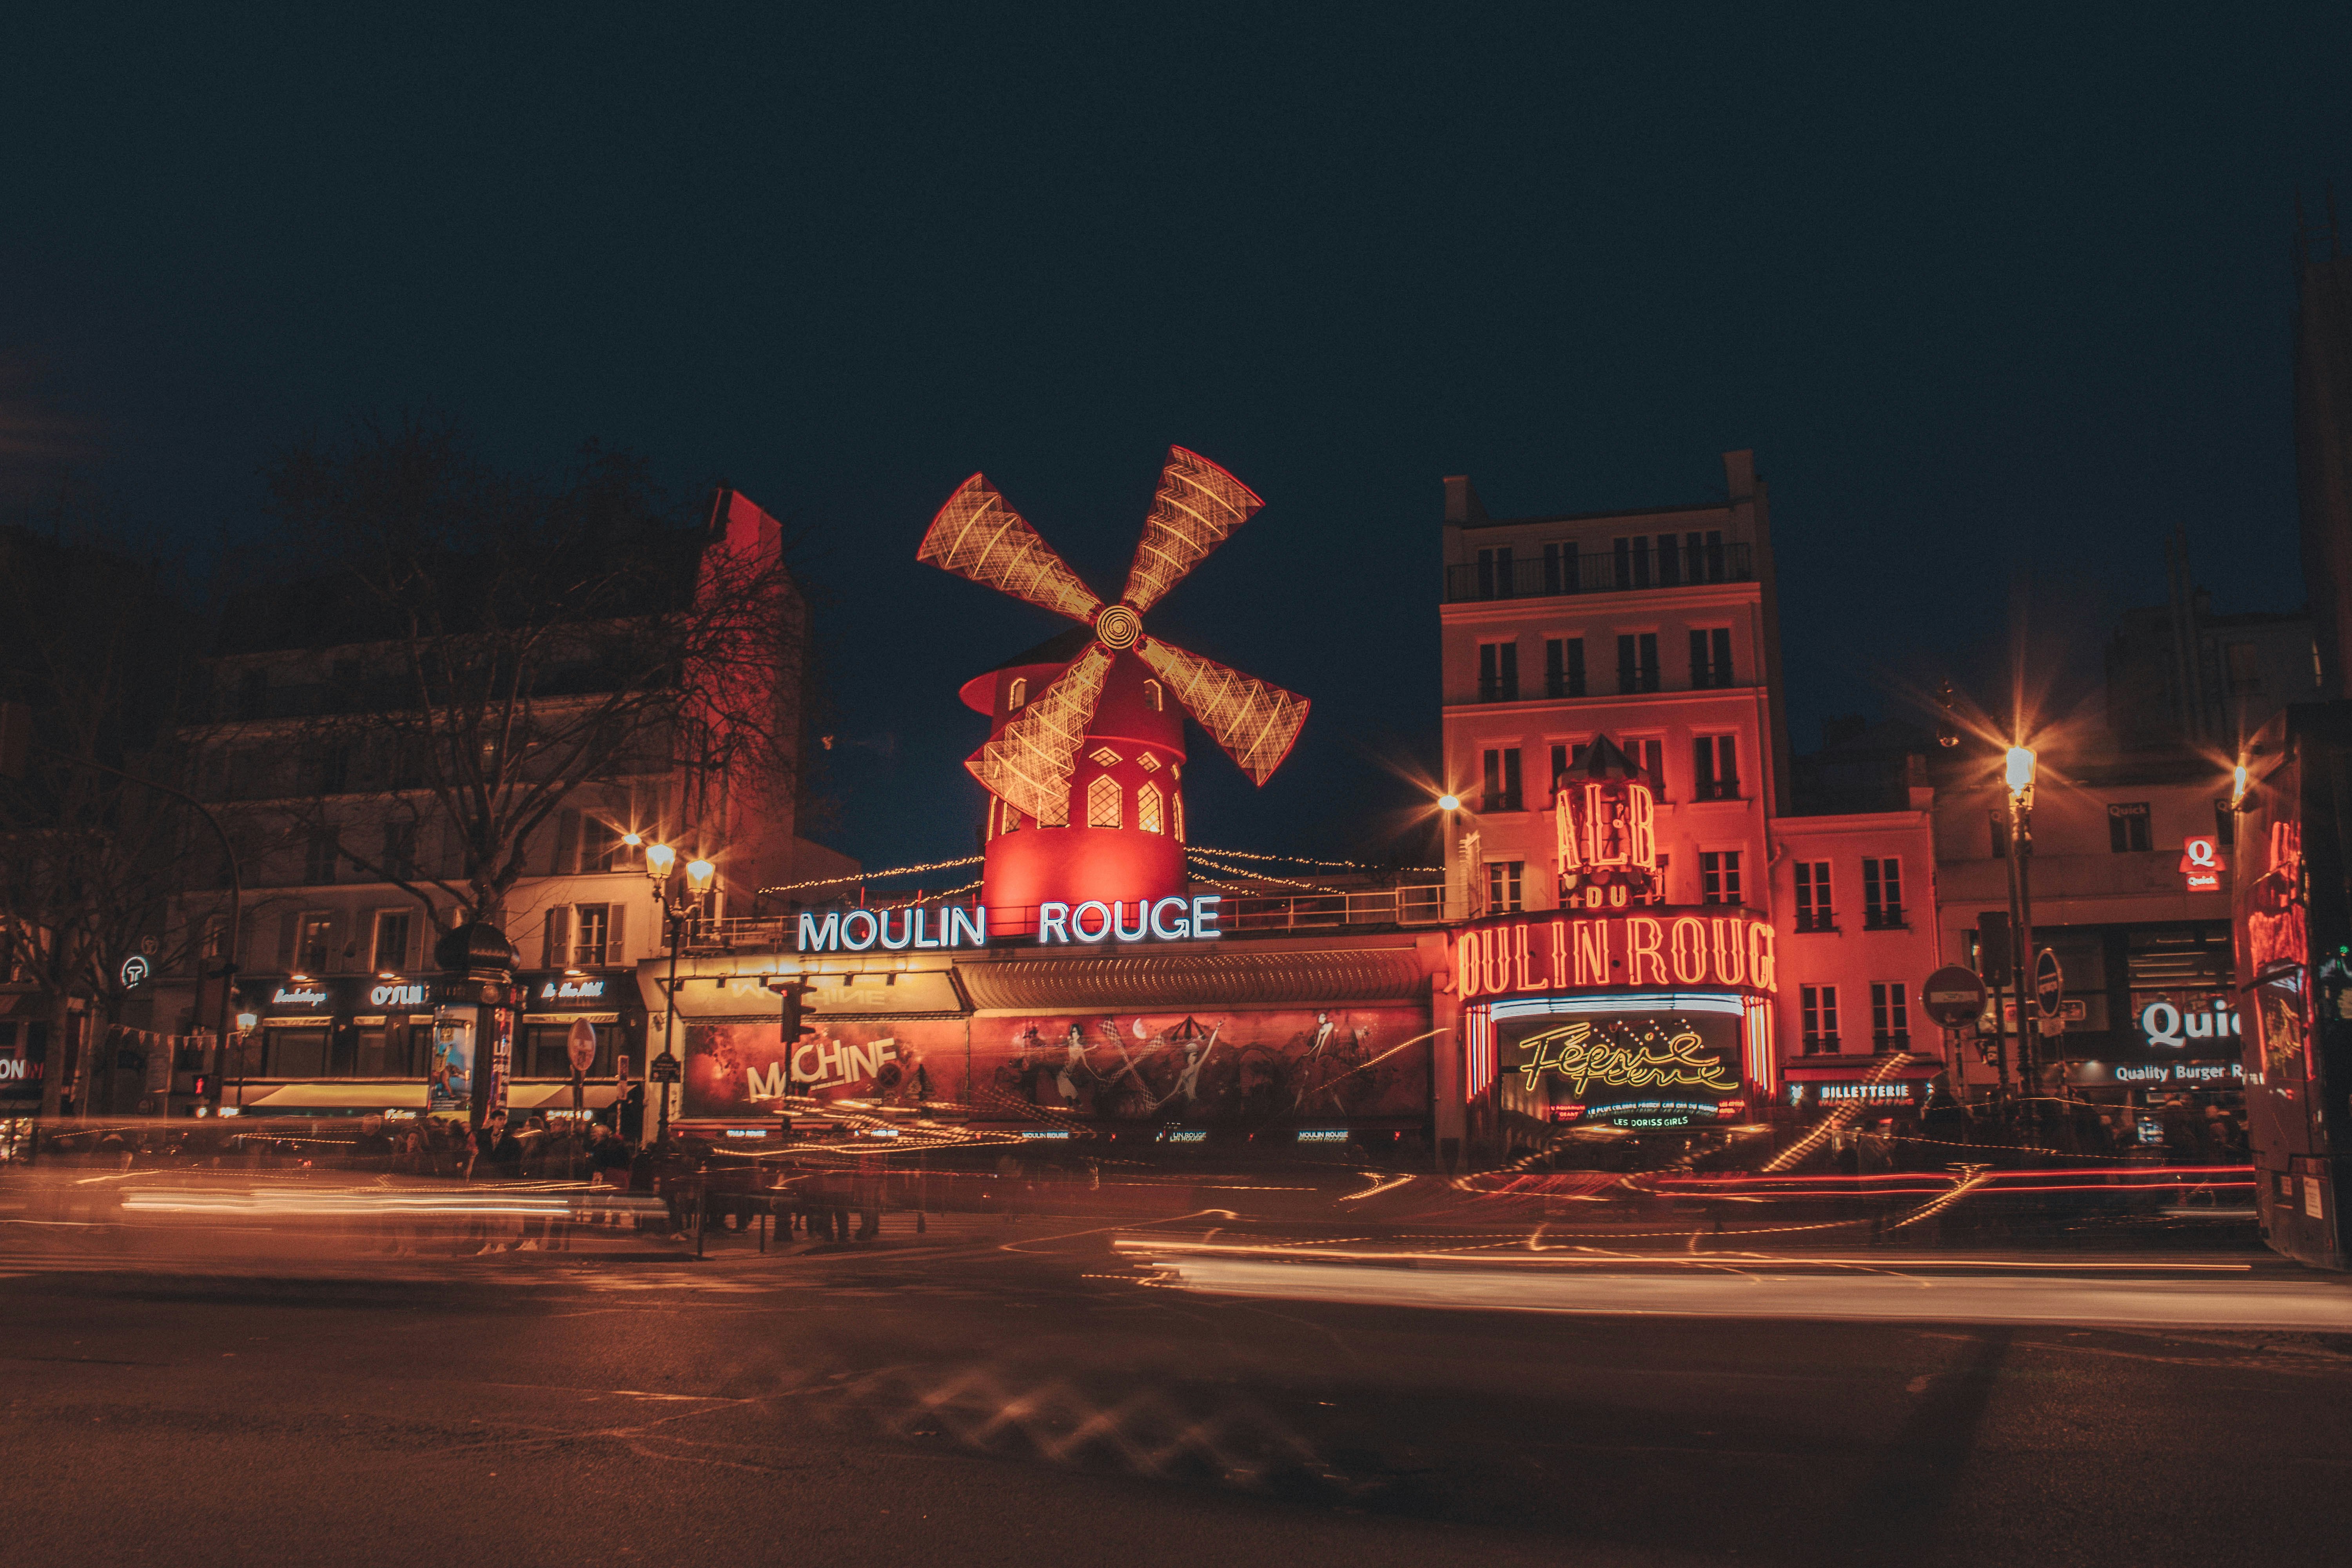 Moulin rouge, Pigalle